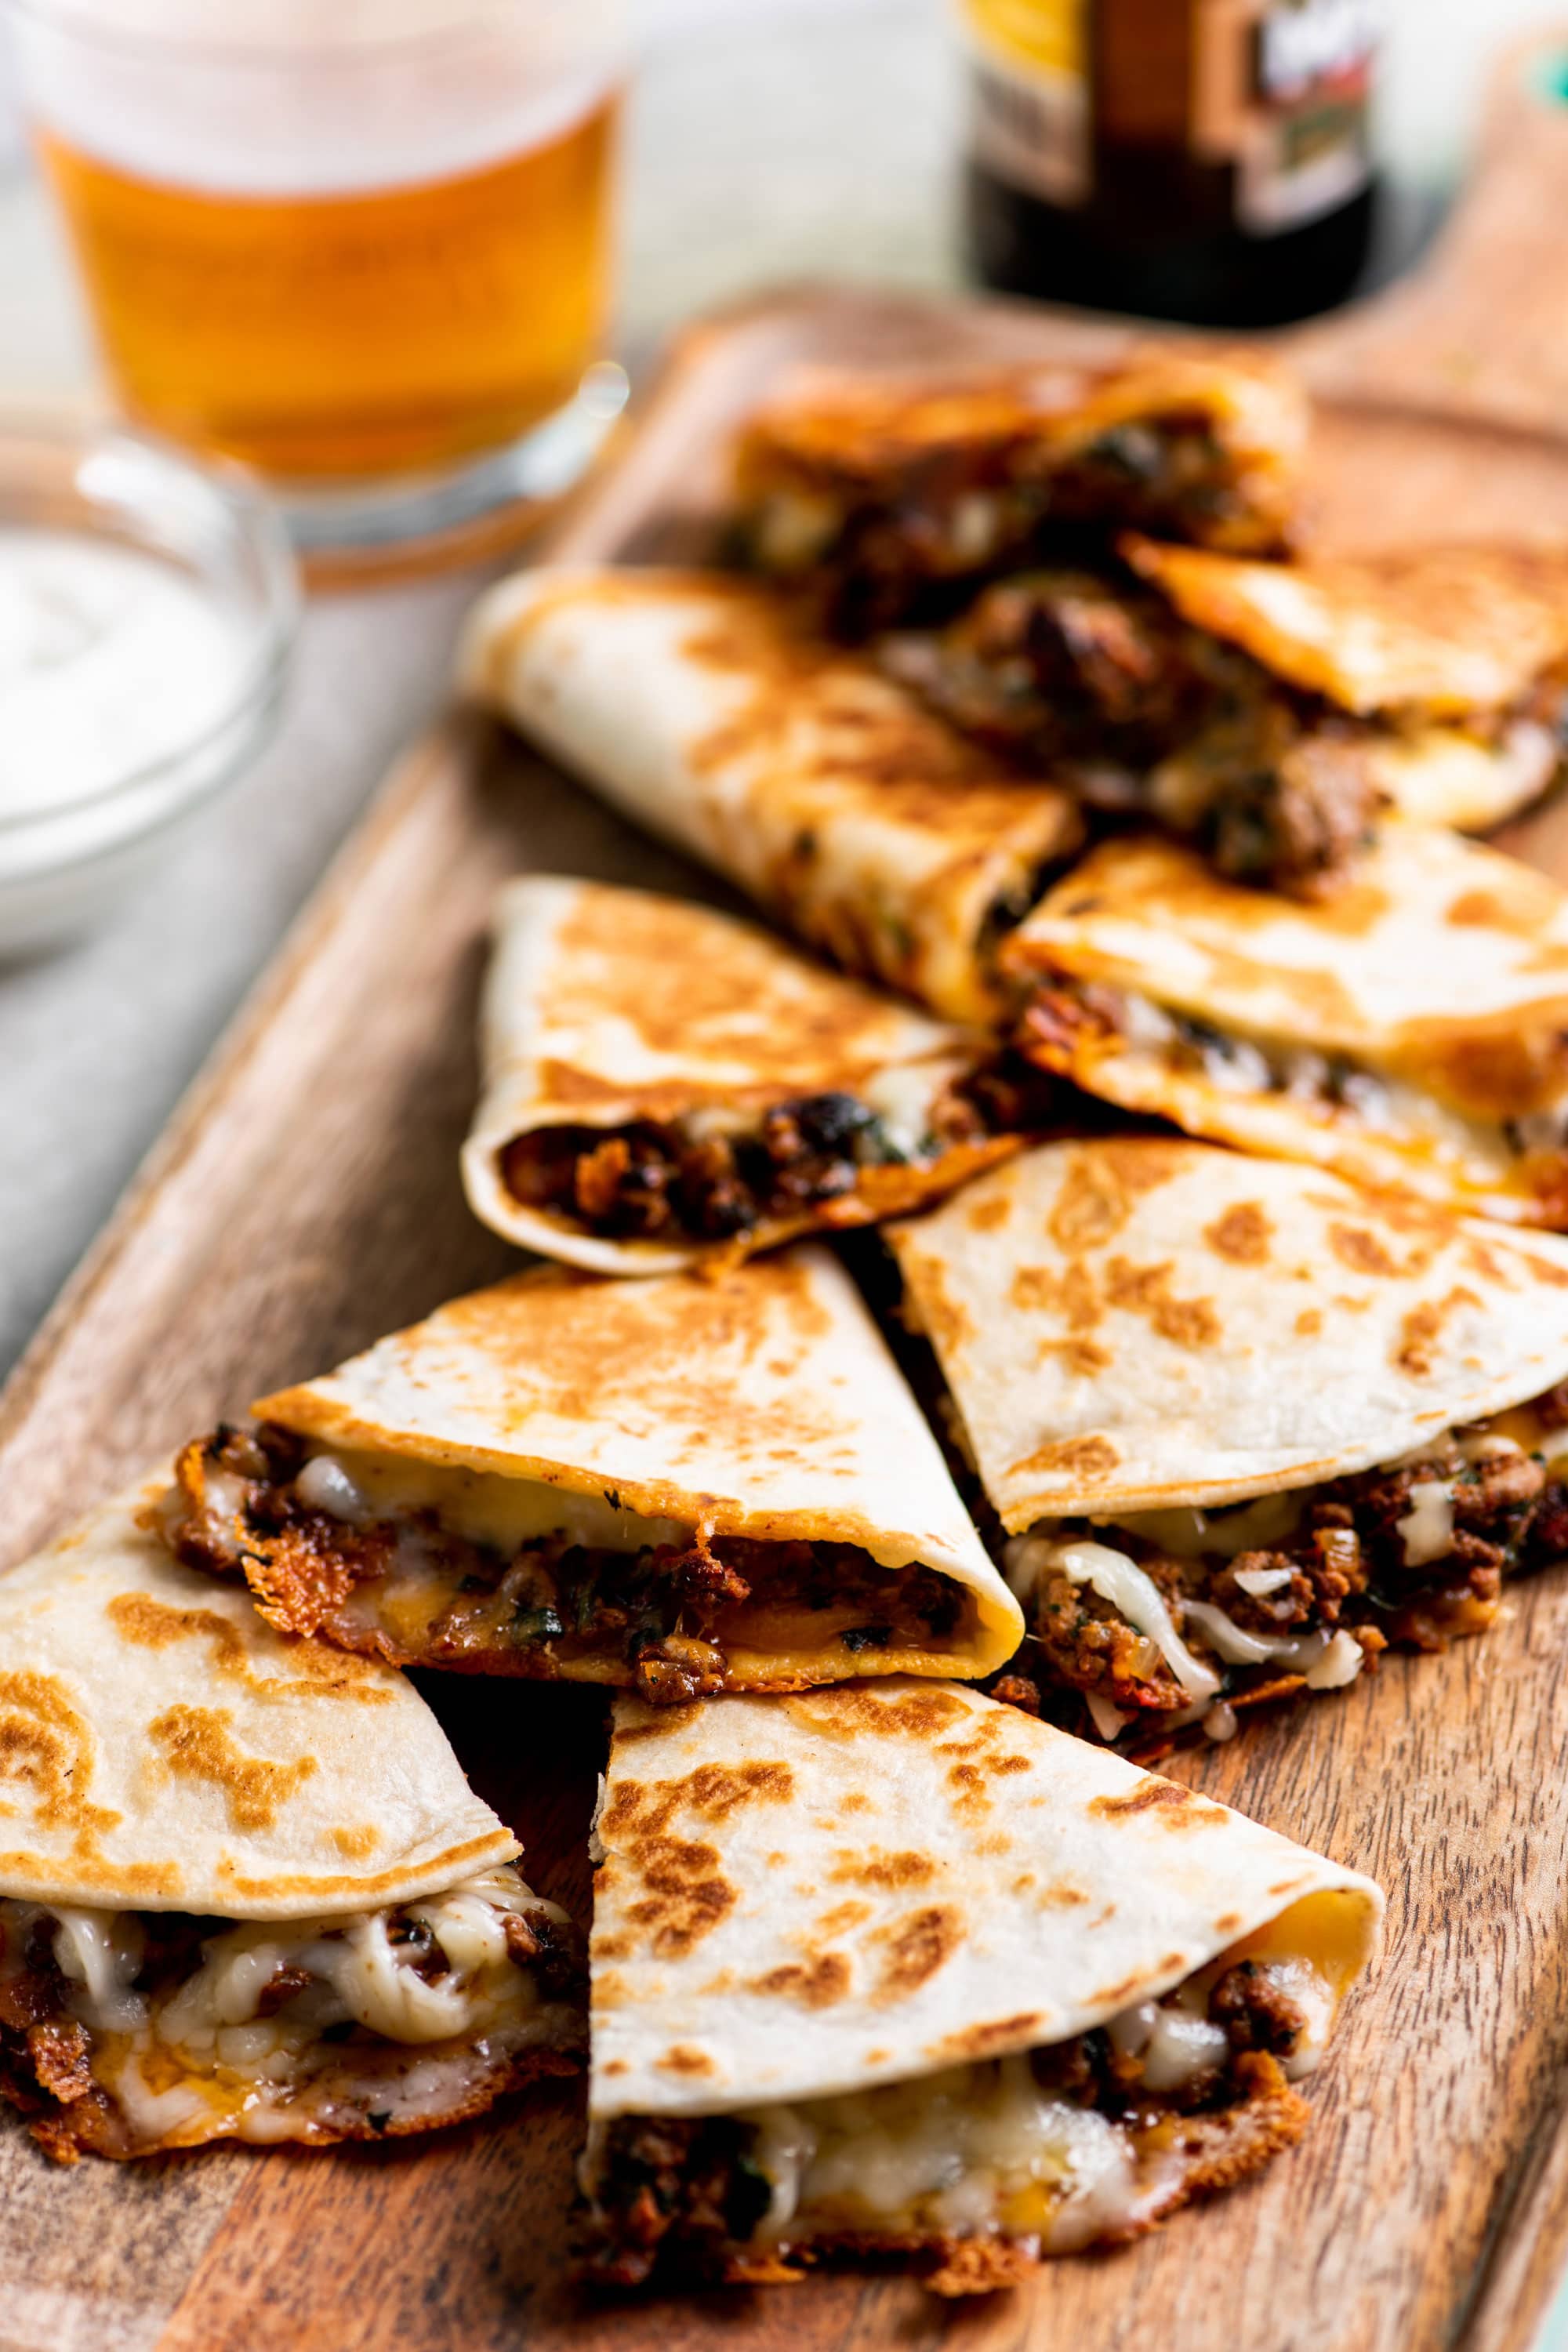 Cheesy Ground Beef Quesadillas on cutting board alongside glass of beer.